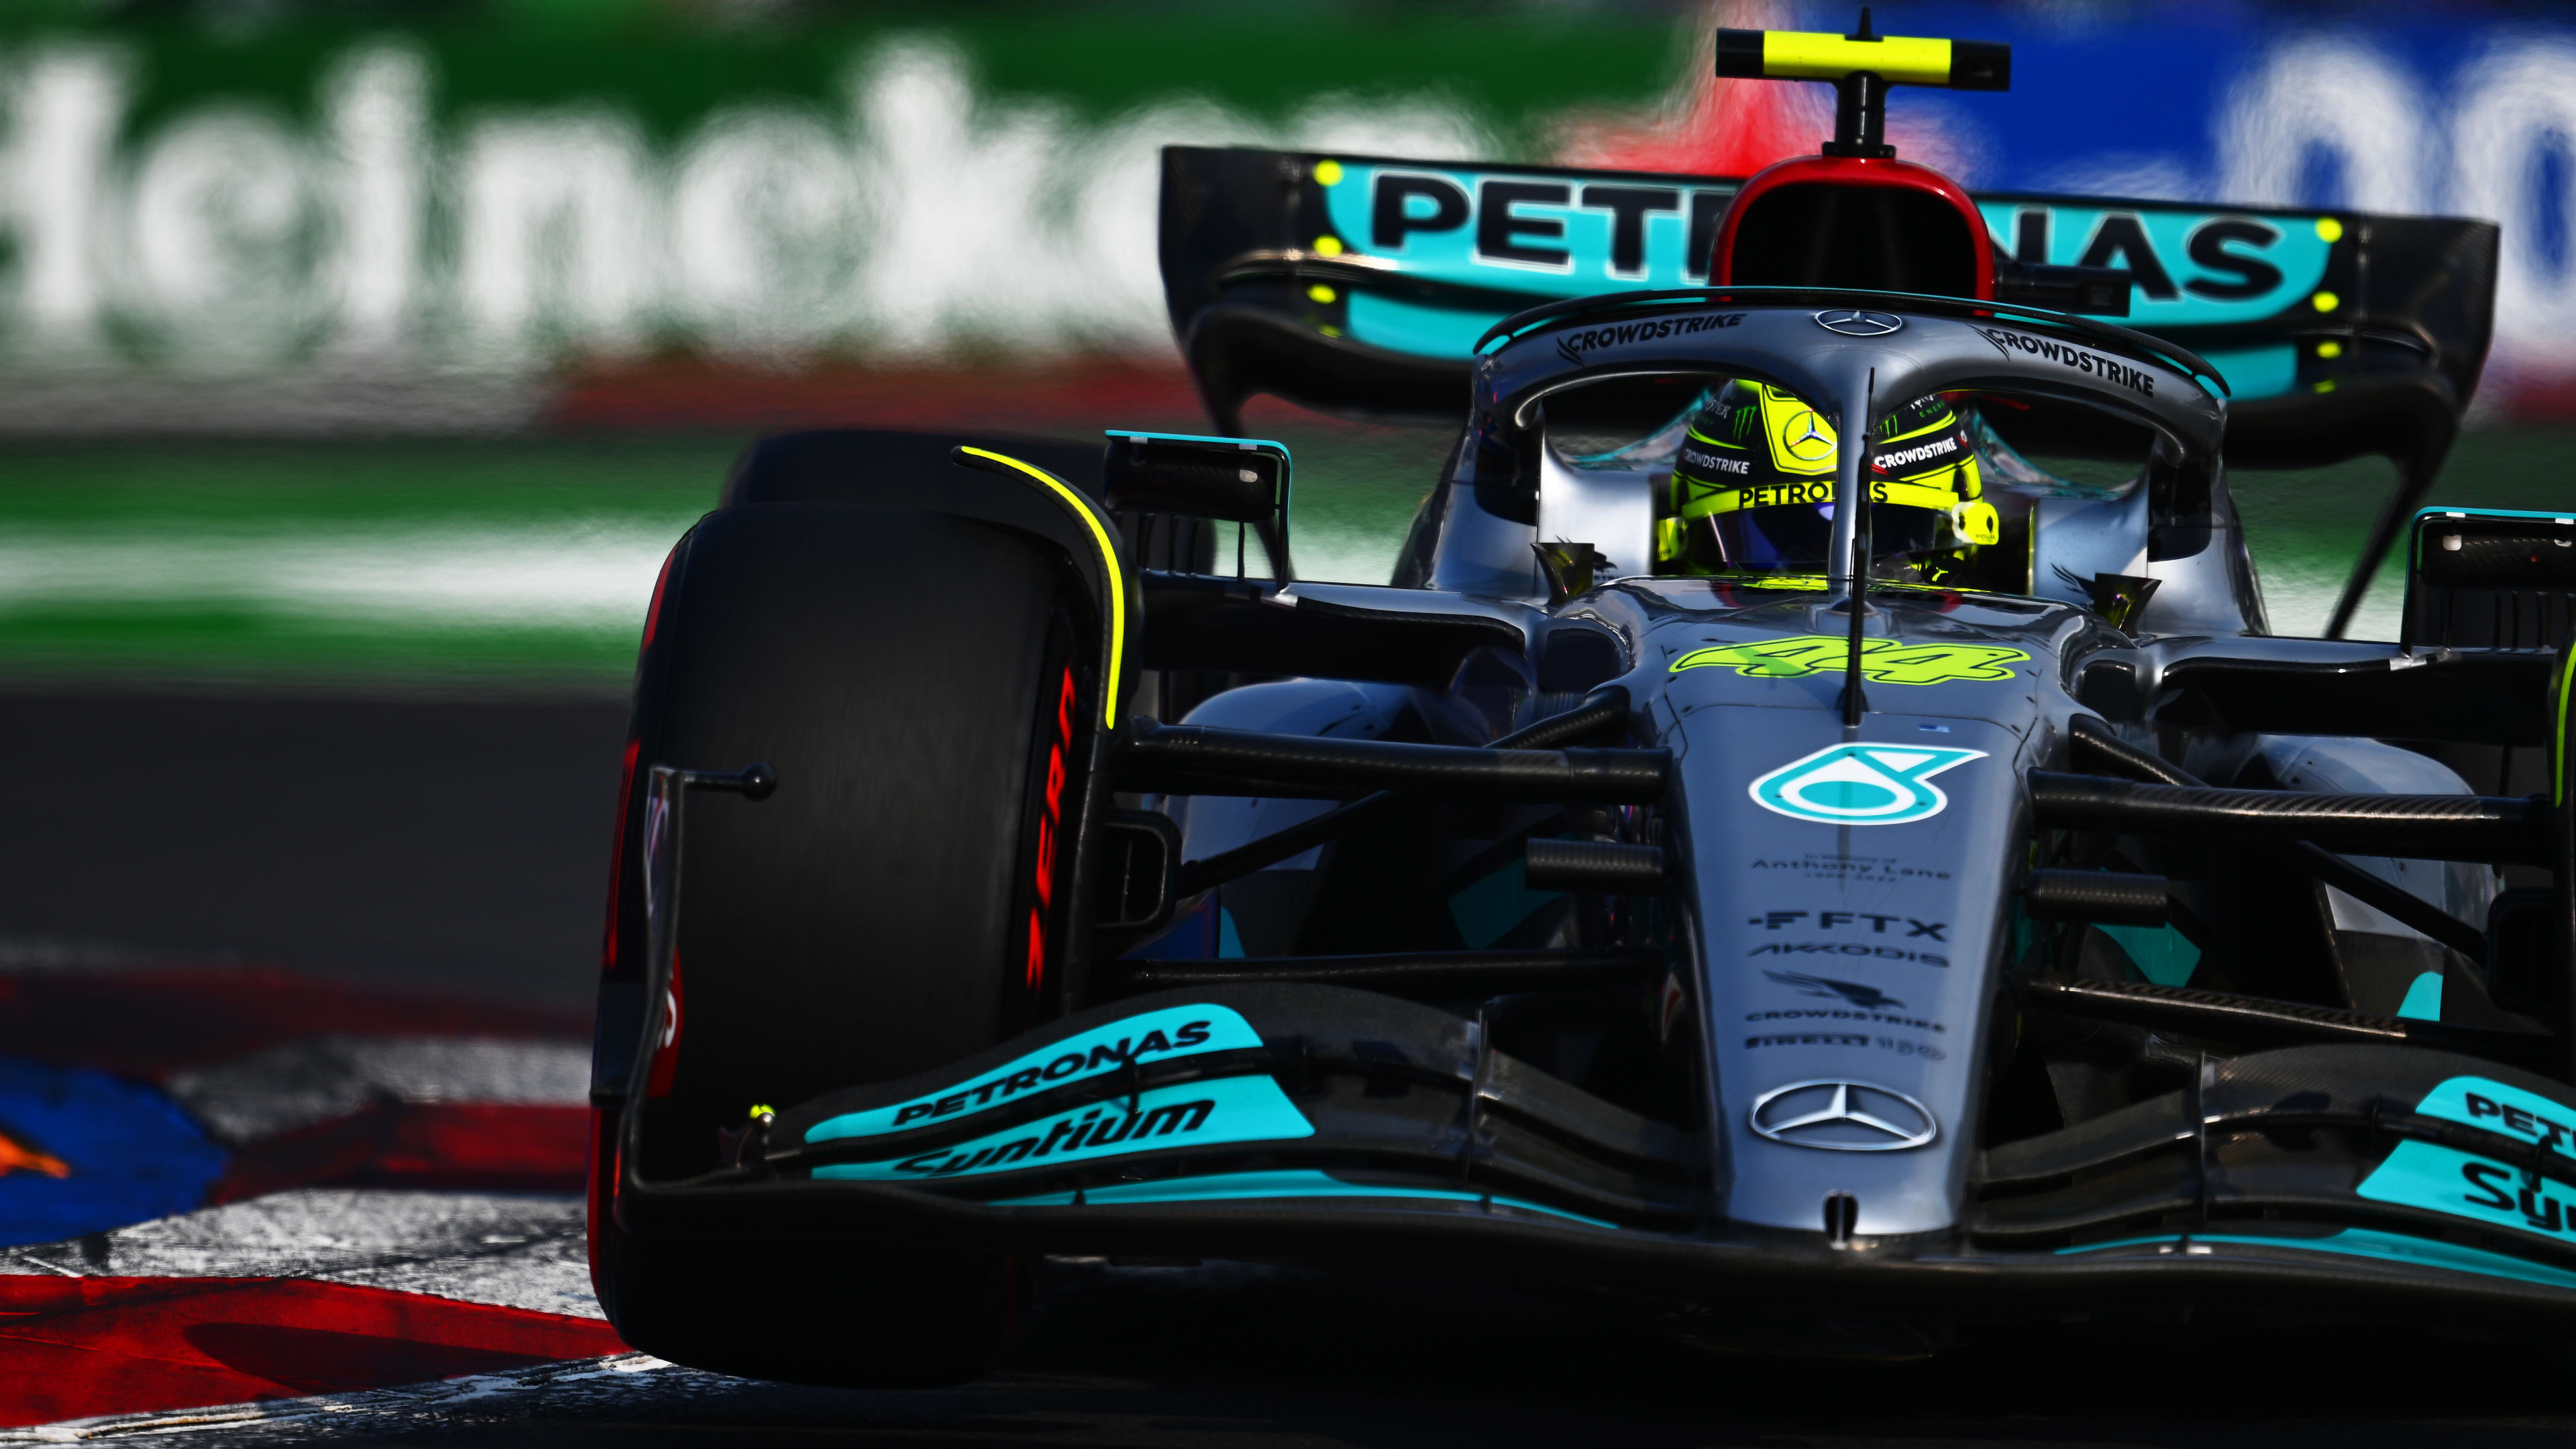 TREMAYNE Mercedes resurgence means we could be in for a thrilling end to 2022 Formula 1®